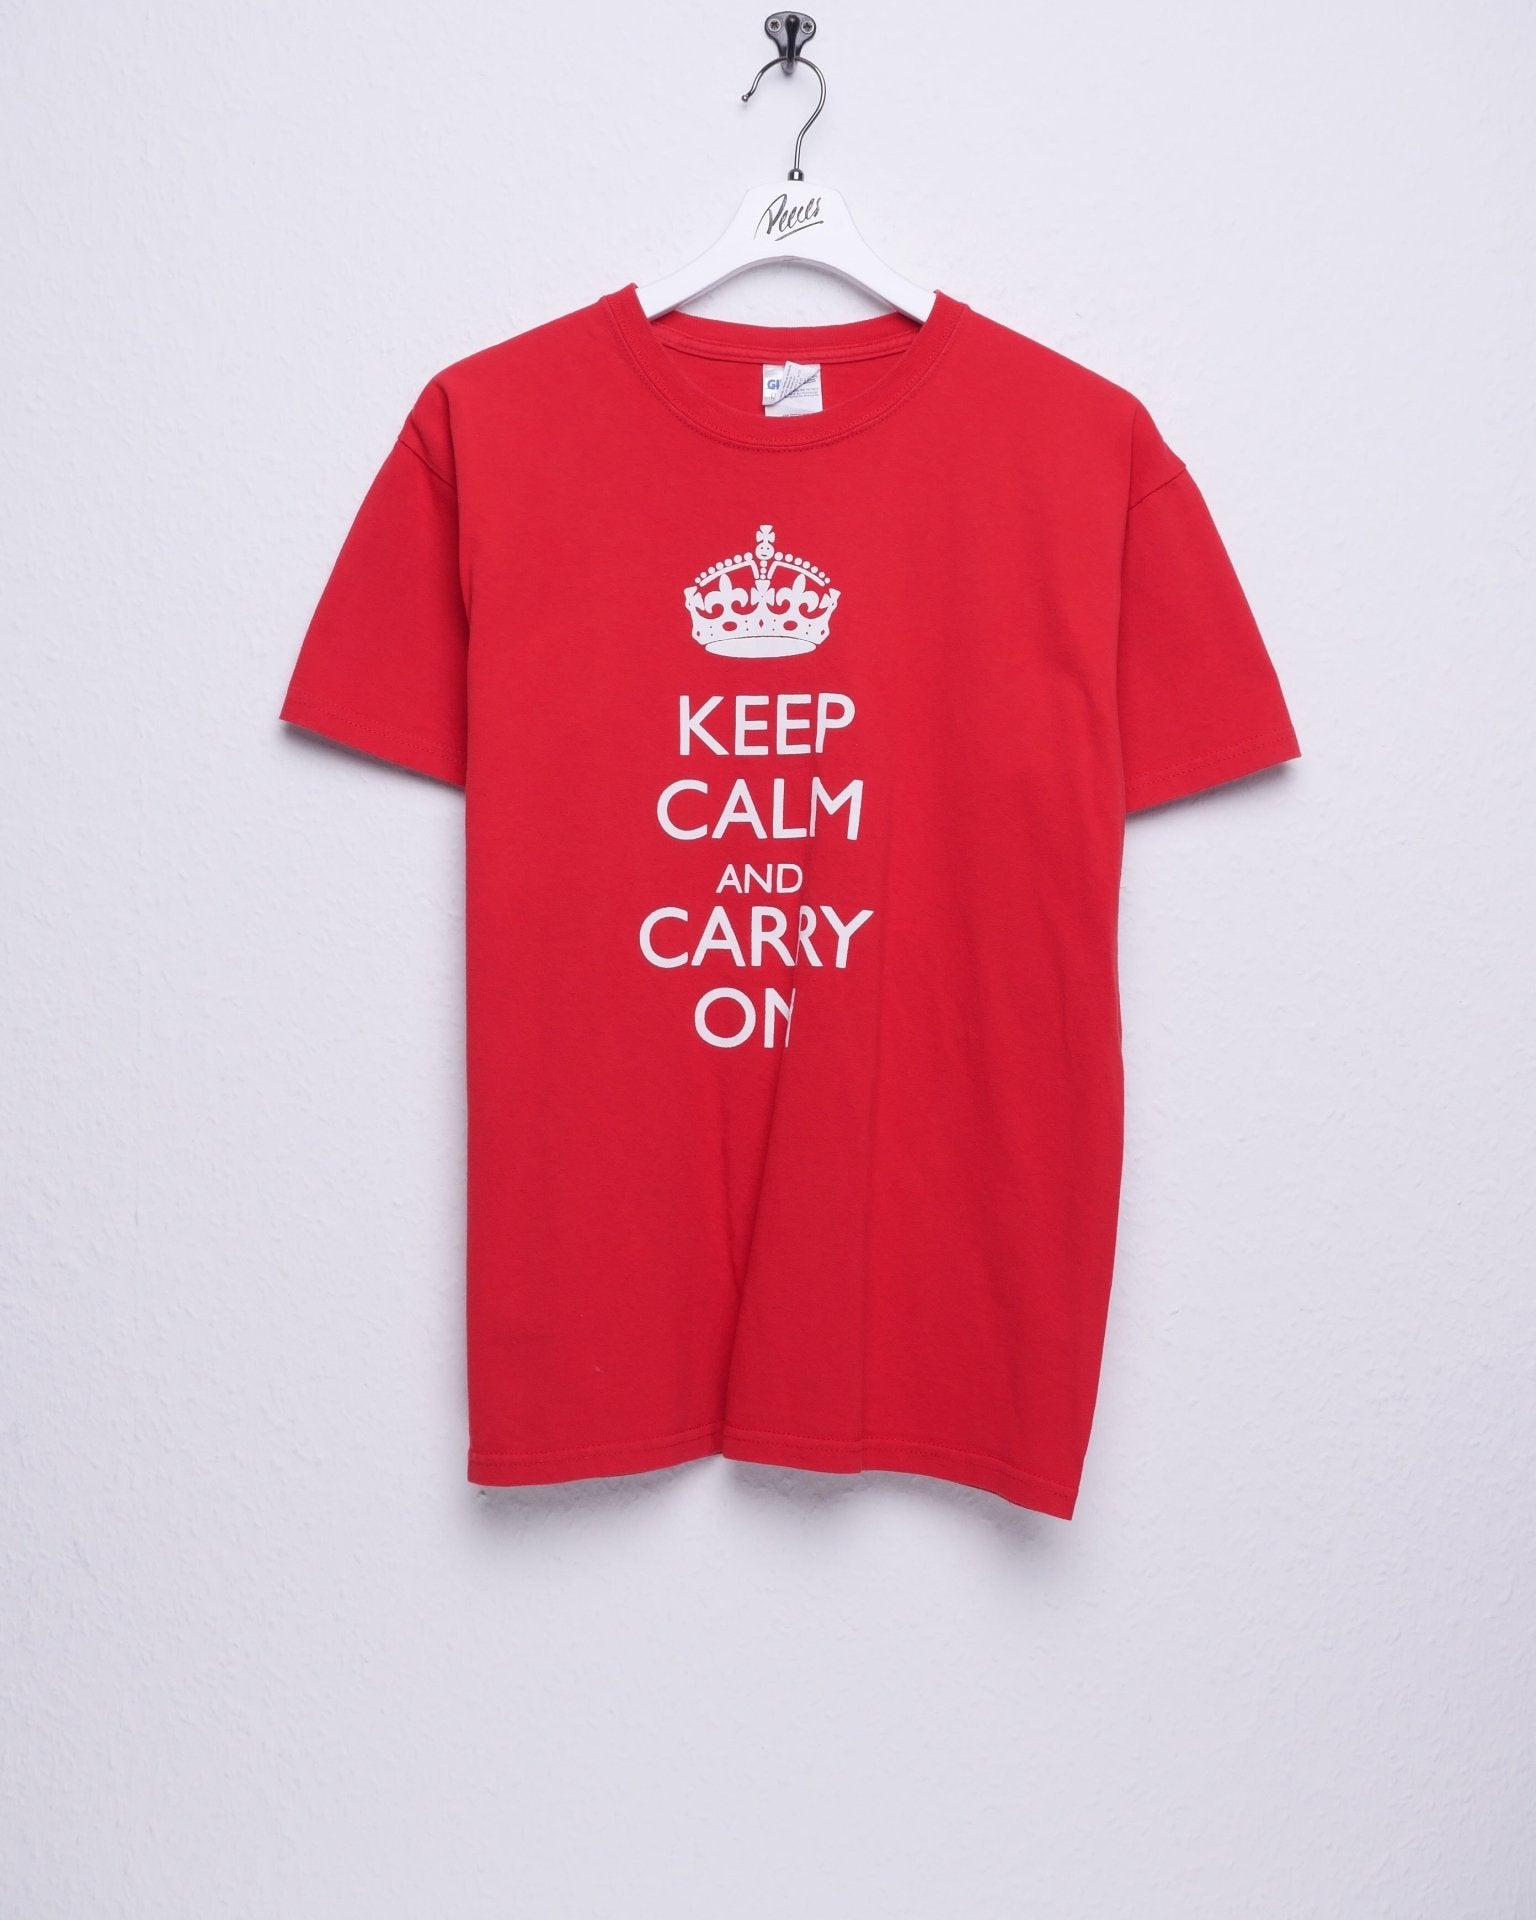 Keep Calm And Carry On printed Spellout Shirt - Peeces